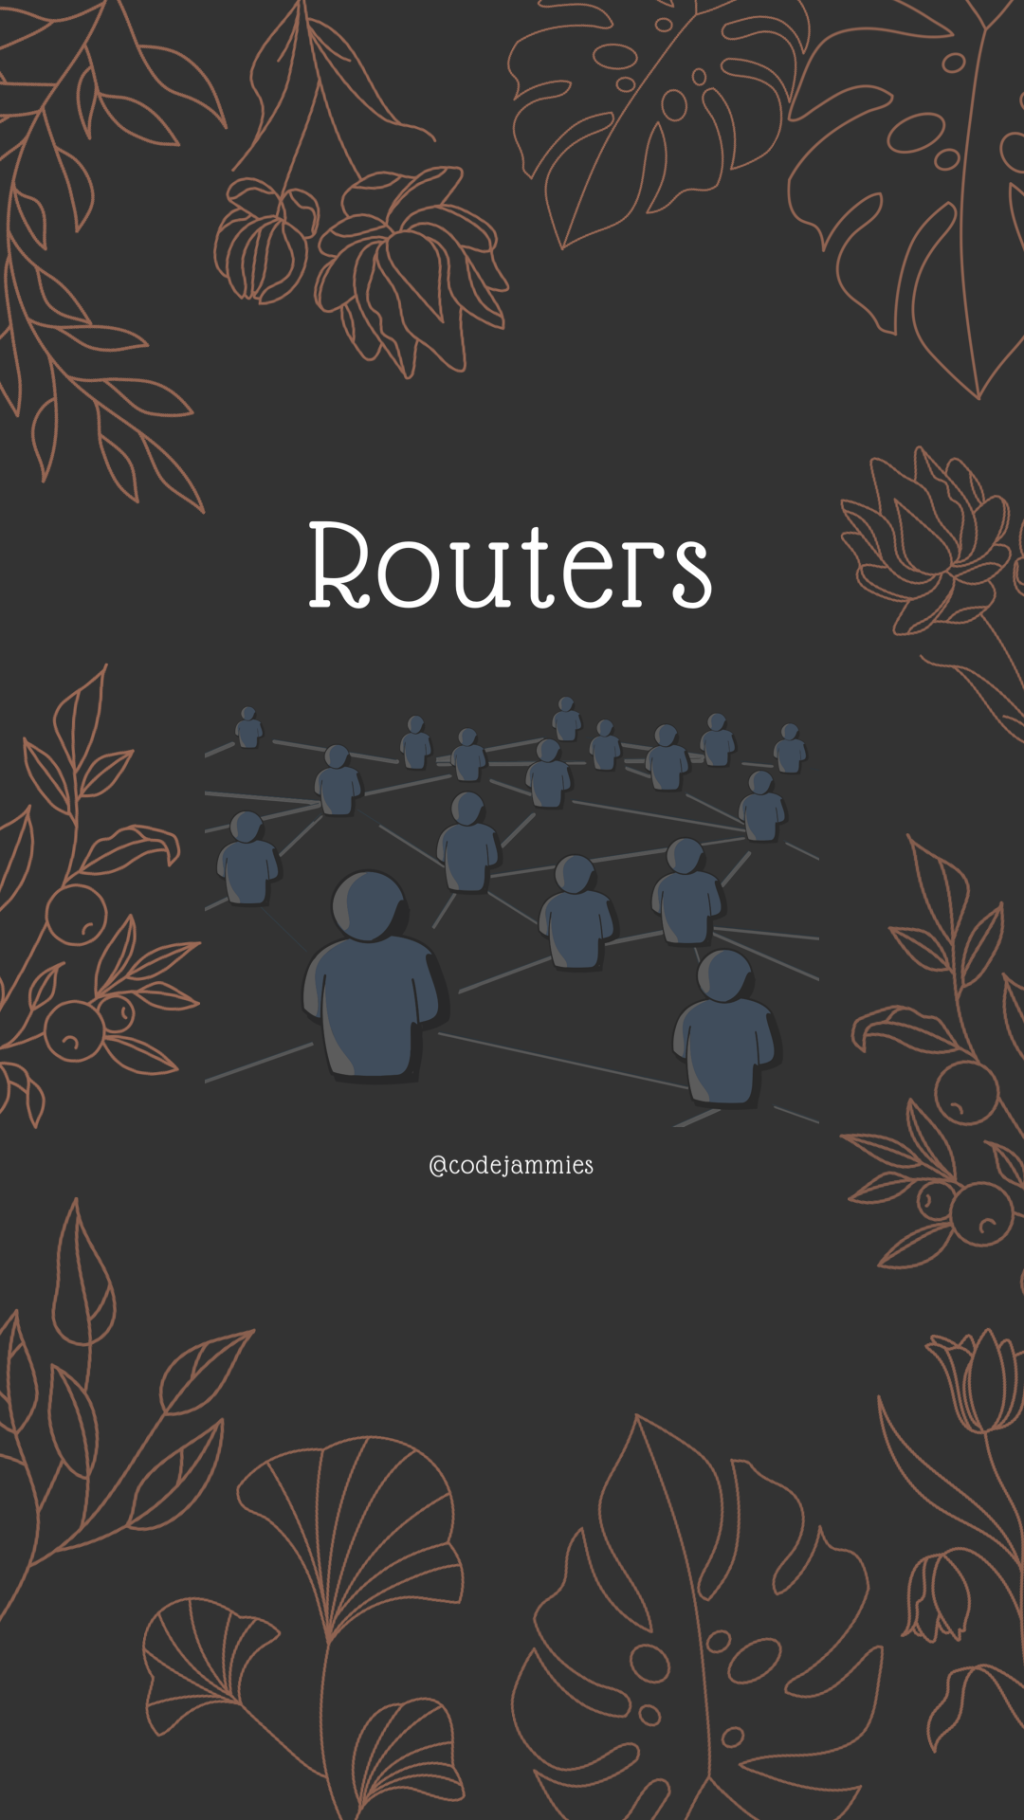 30 Seconds Read: Routers